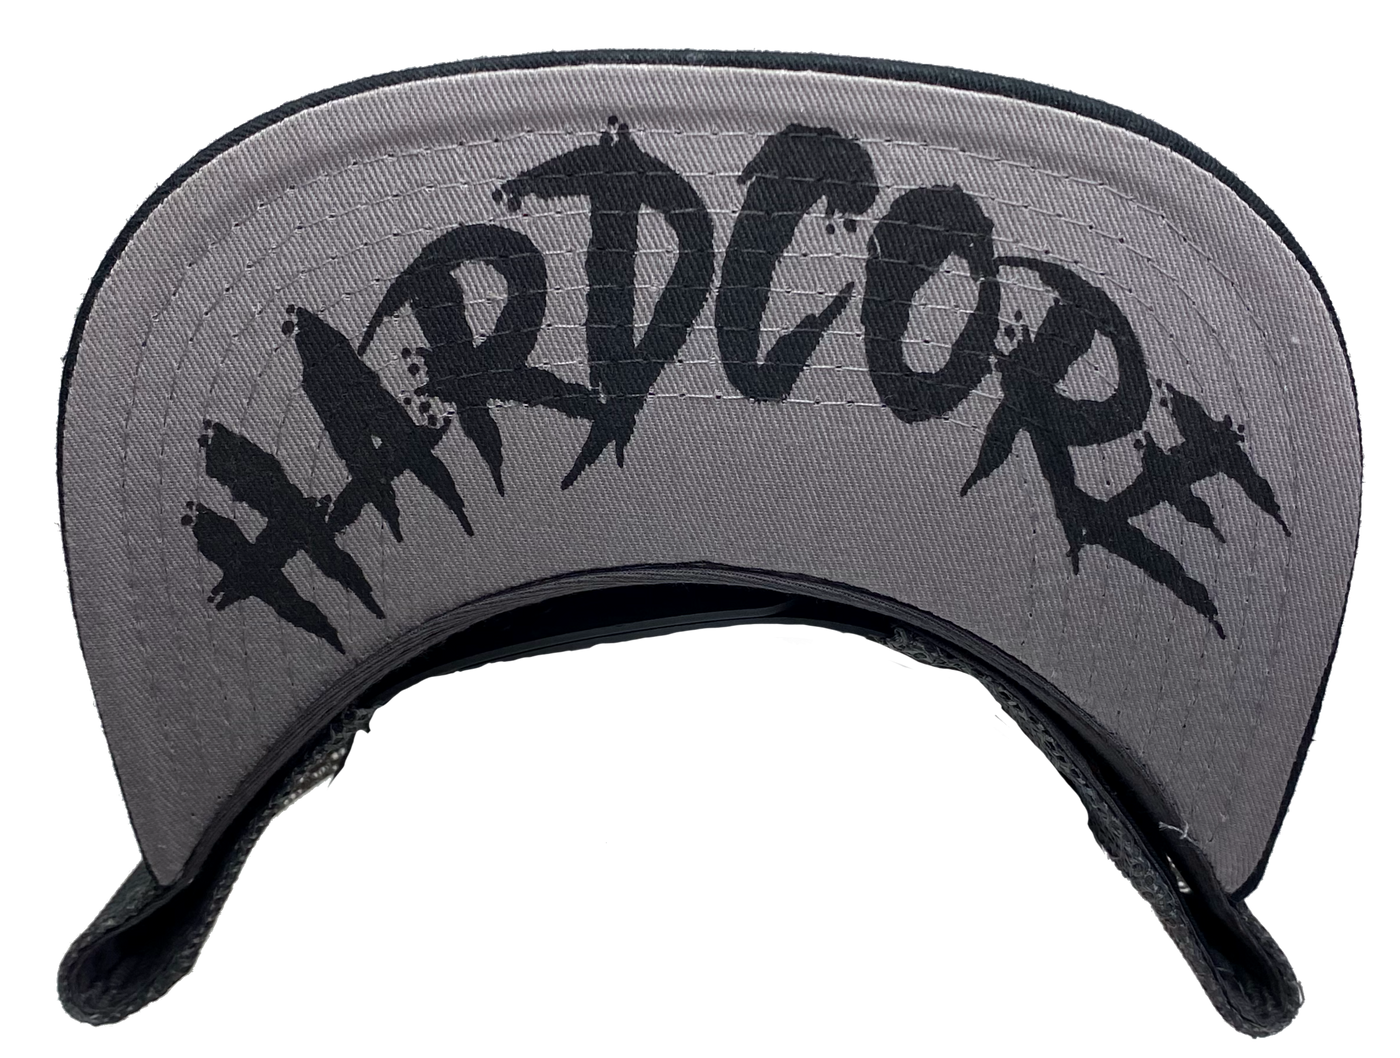 Black Flat Bill Cap with Gray mesh back. Front has a Silver embroidered Brass Knuckles patch. "HARDCORE" design also under the bill. Structured top to keep its shape. Sold at our shop just outside Nashville in Smyrna, TN.